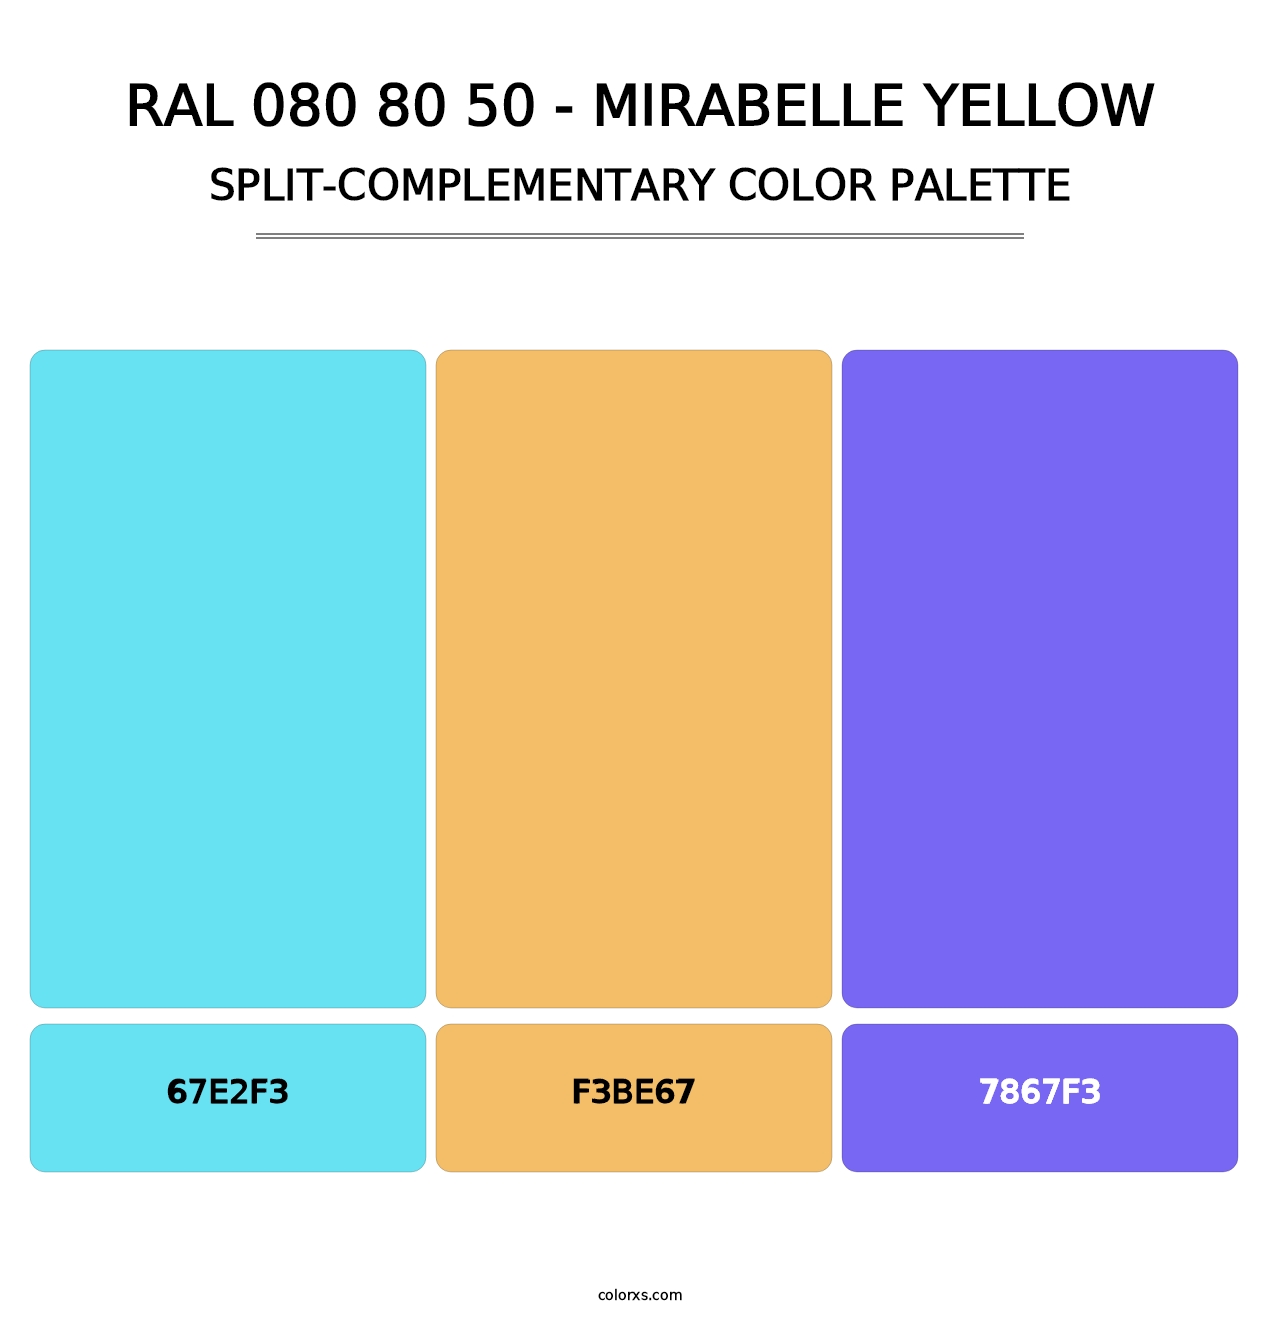 RAL 080 80 50 - Mirabelle Yellow - Split-Complementary Color Palette